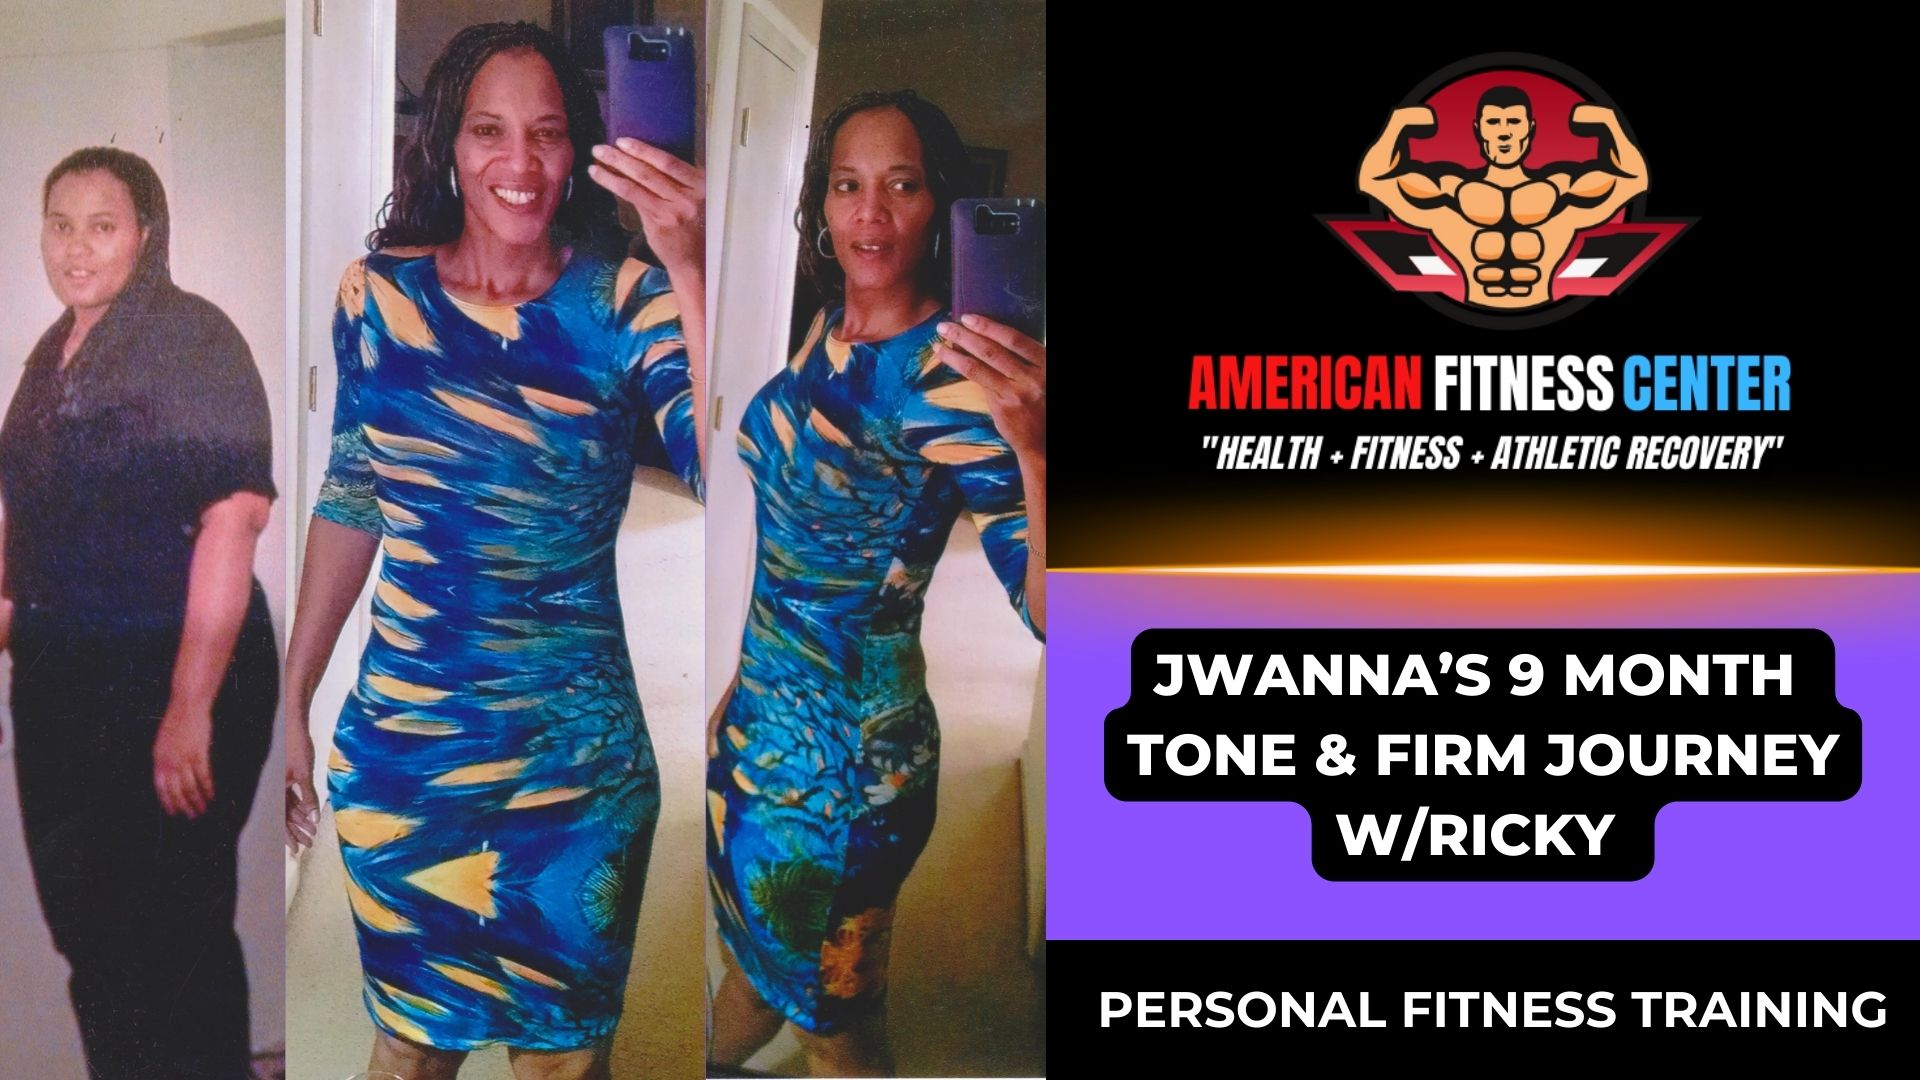 Elite-Personal-Fitness-Training-For-Obese-Individuals-American-Fitness-Center-Fayetteville-GA